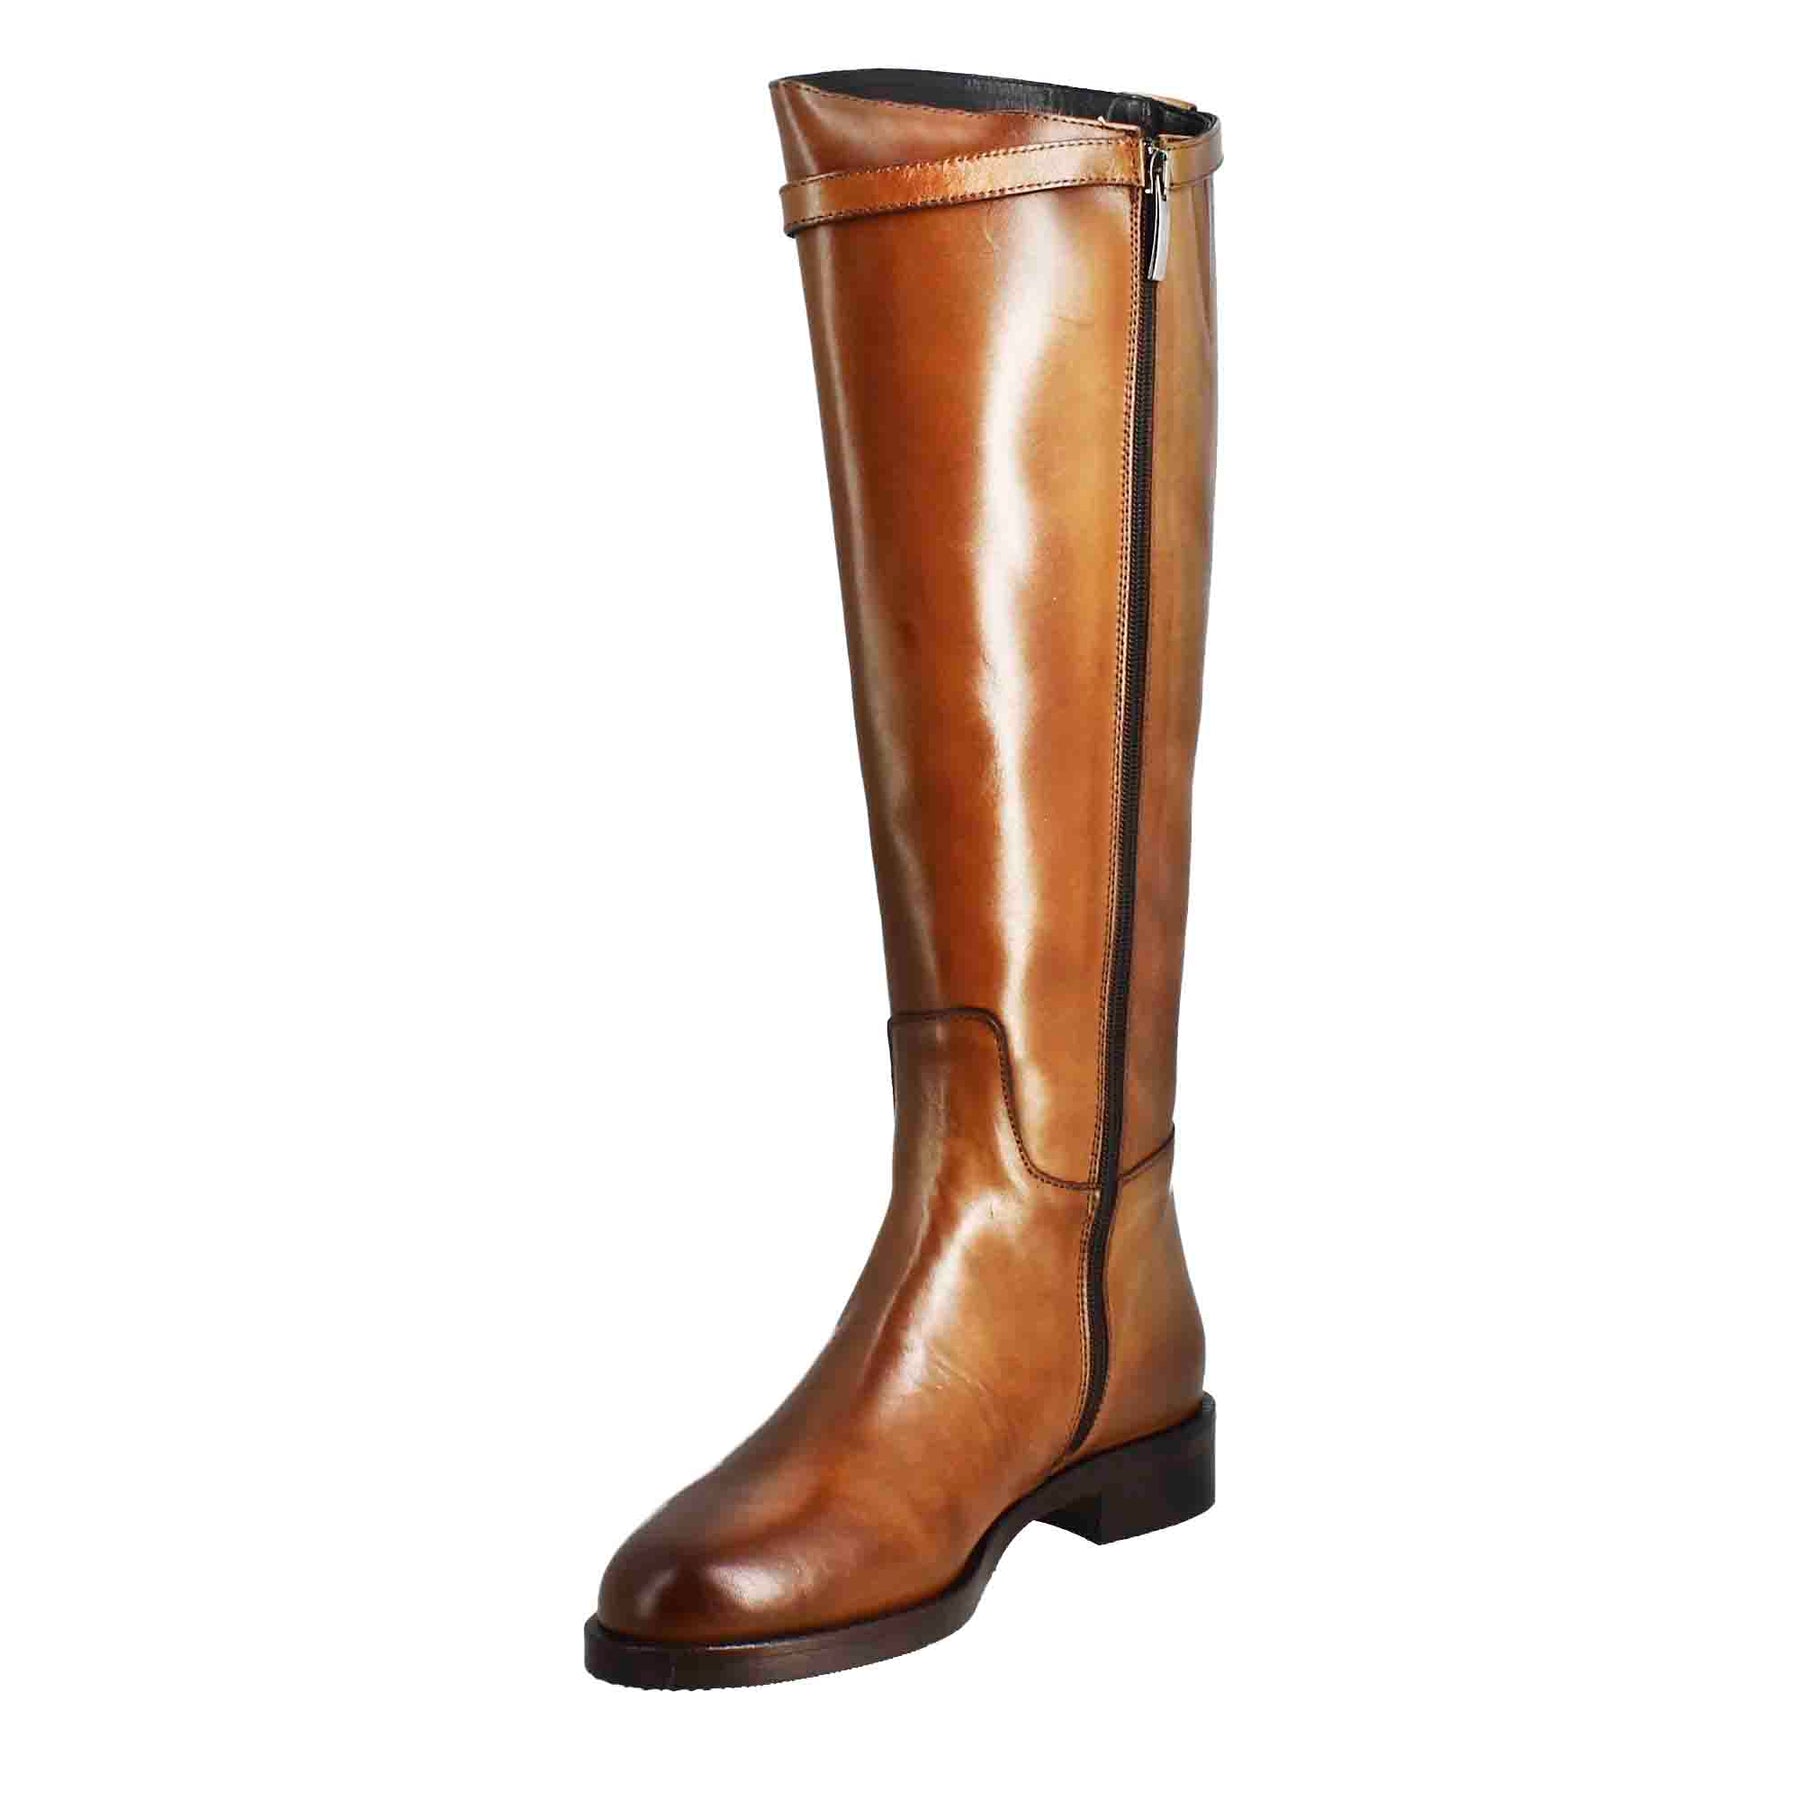 Smooth women's knee-high boot with low heel in tobacco-colored leather